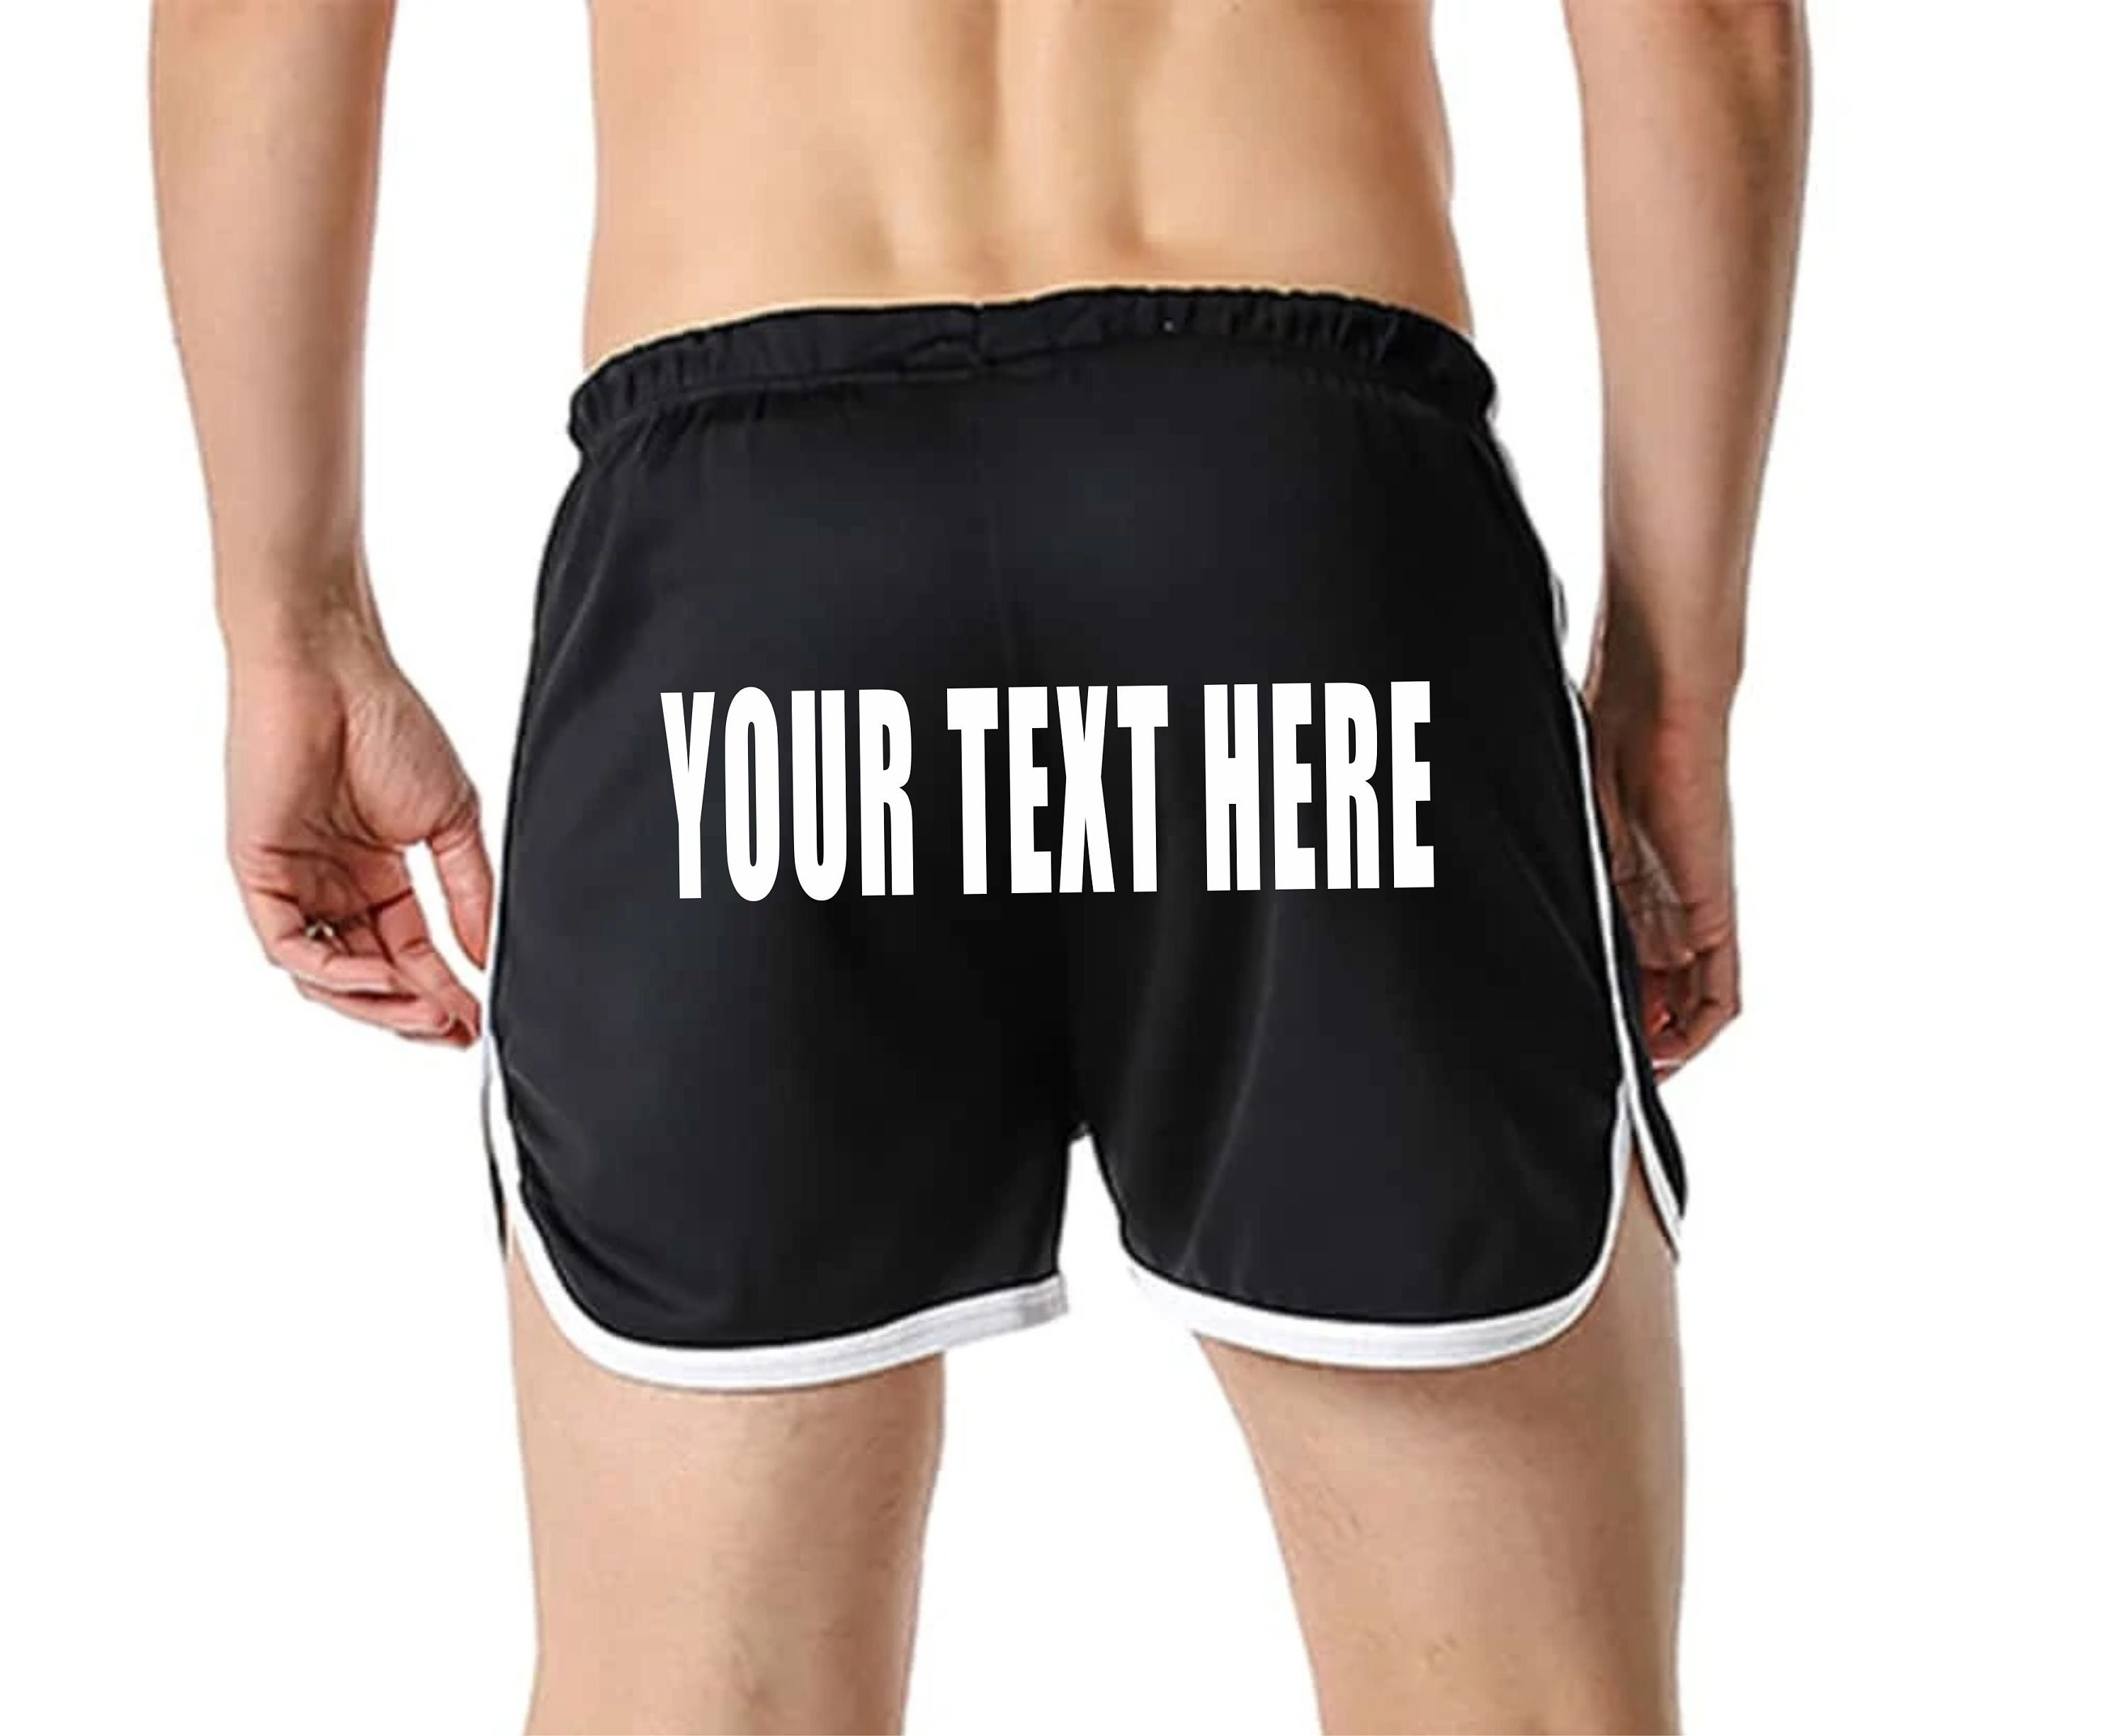 CUSTOM BOOTY SHORTS Black Retro White Trim Cheeky Gym Comfy Printed  Personalized Customized Name Logo Team Company Group Bulk Your Text Here -   Hong Kong